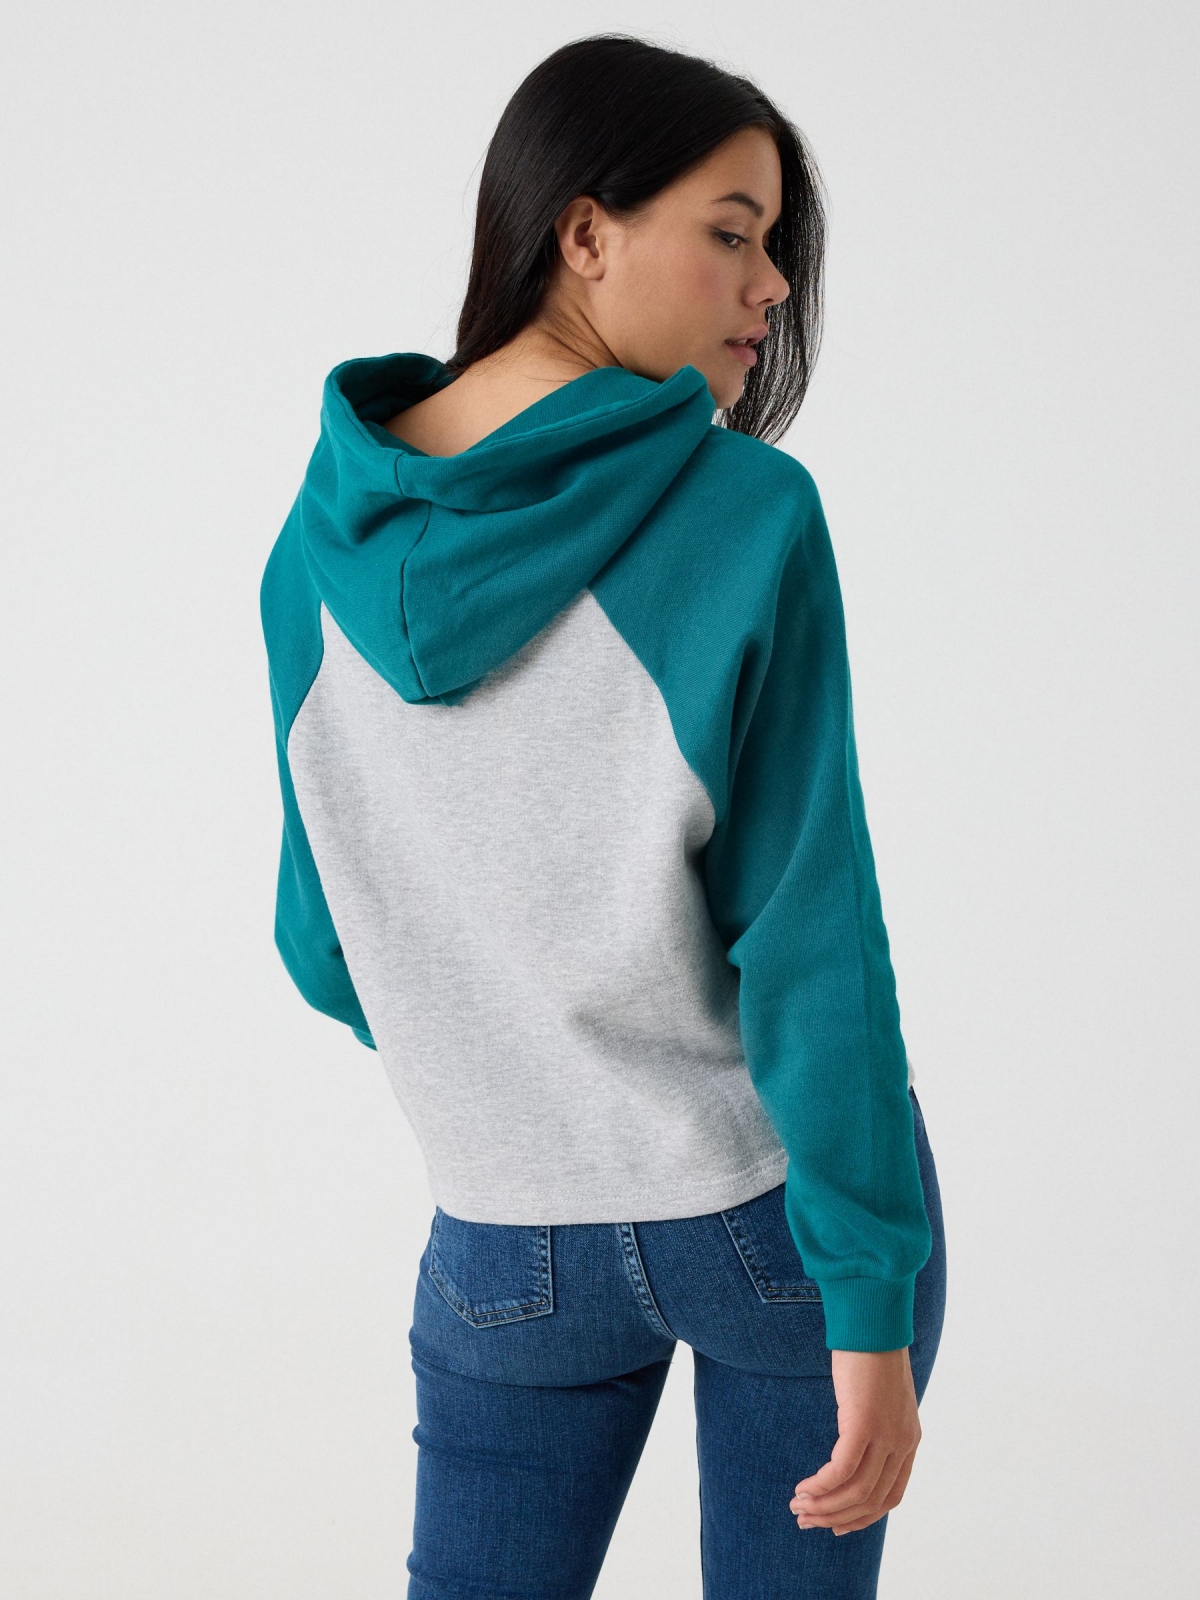 Embroidered hoodie sea green middle back view